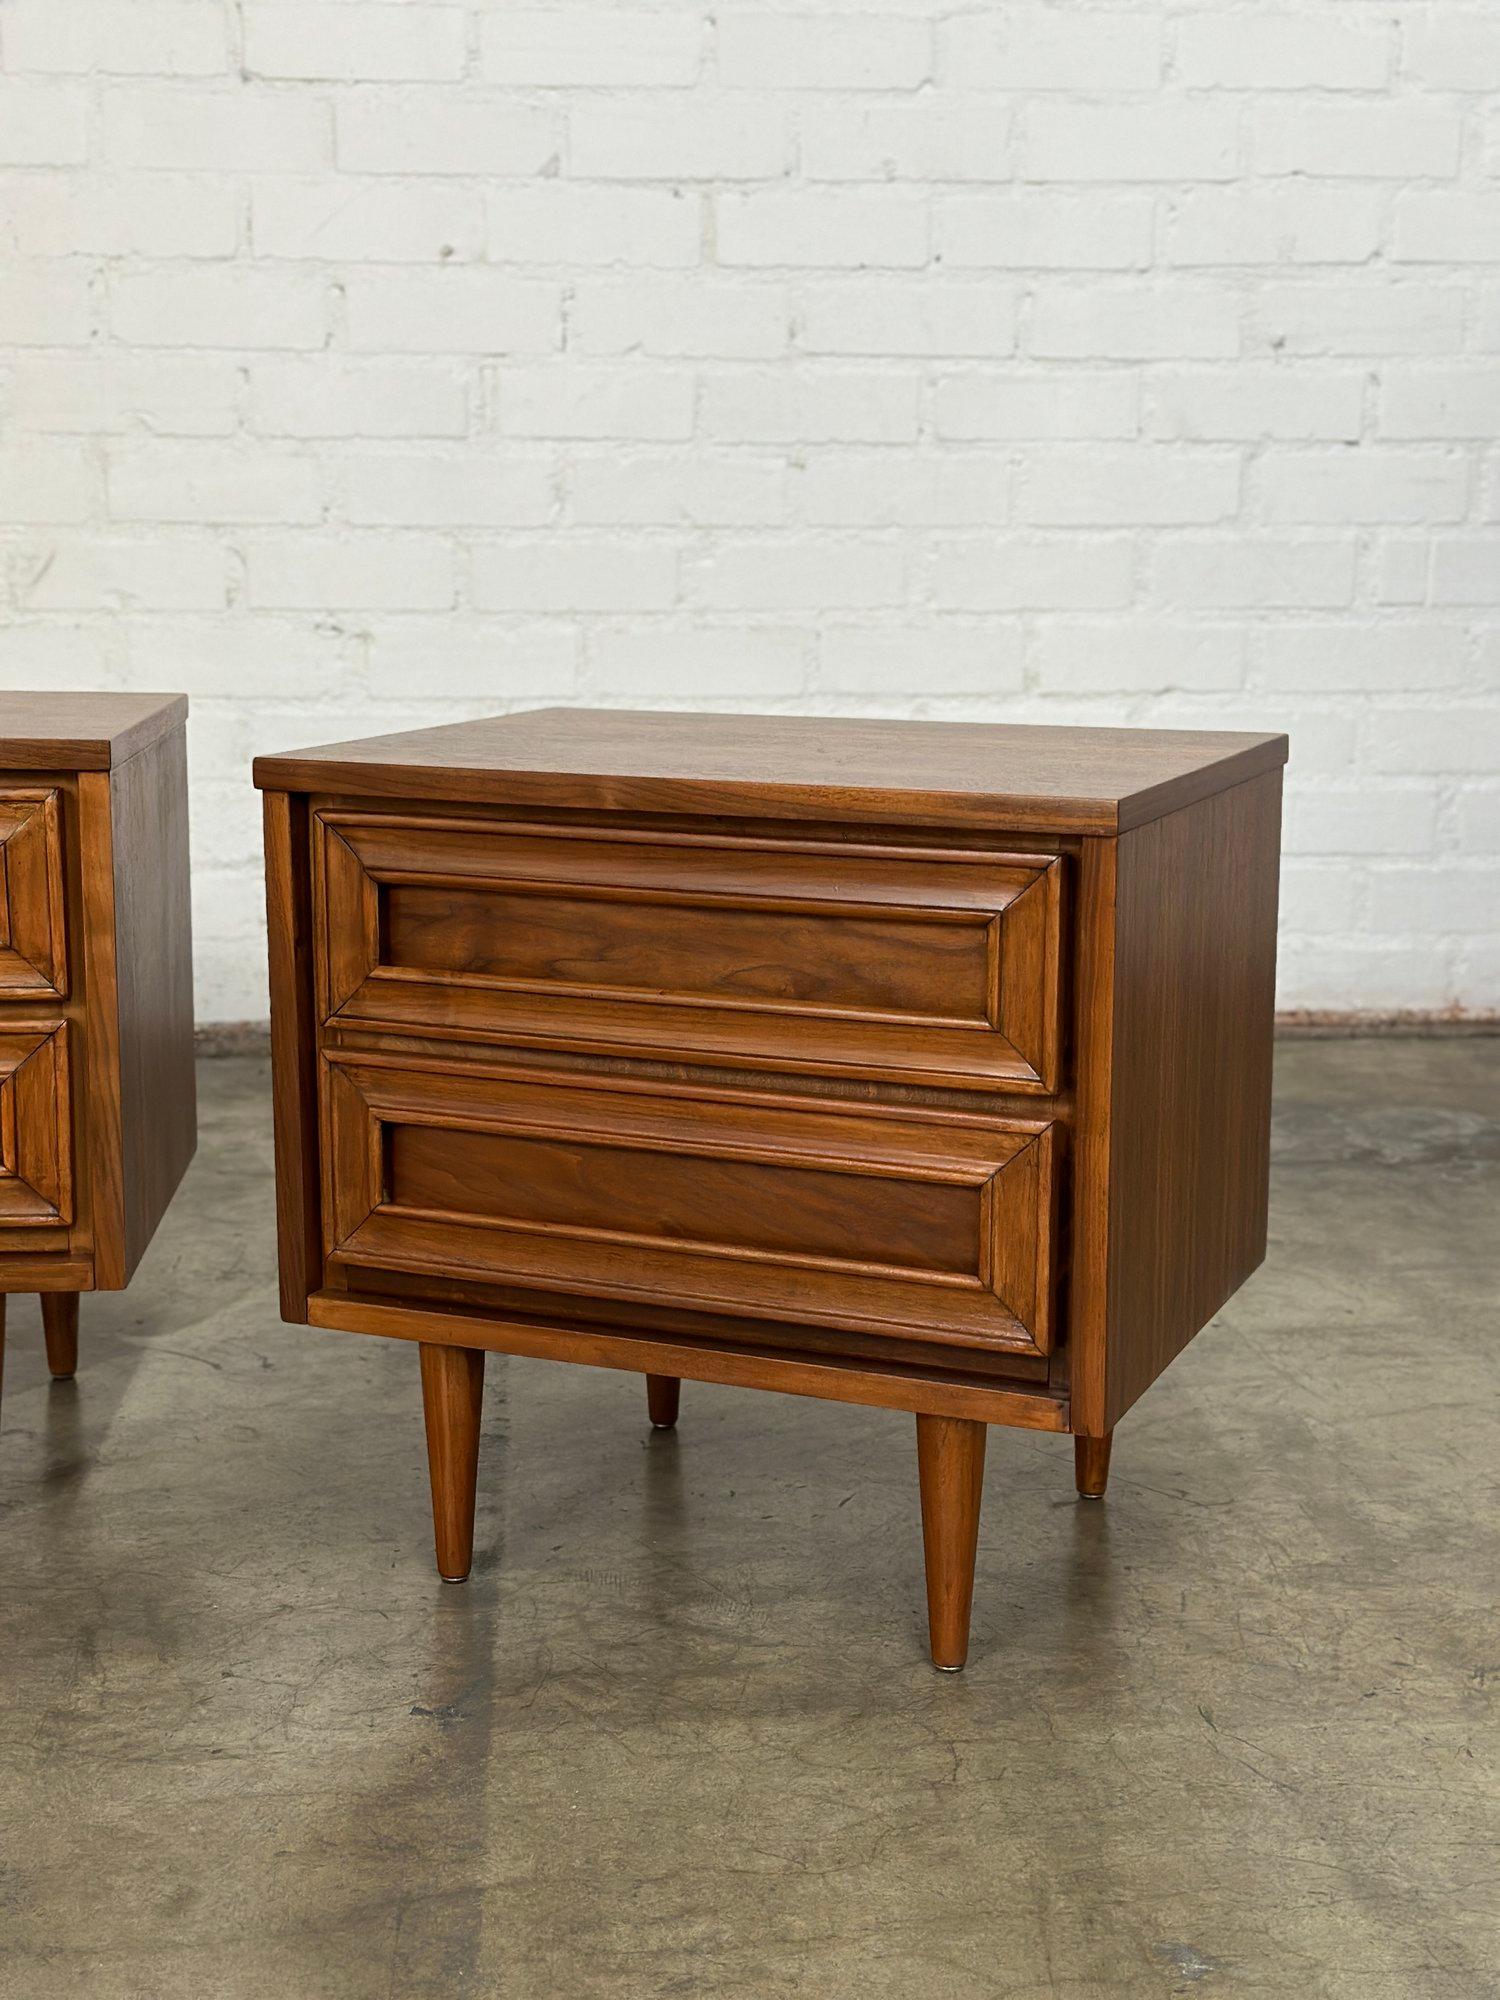 W22 D16 H21.5

Fully restored minimal walnut nightstands. Each unit is structurally sound and fully functional. Drawers feature encased fronts that serve as handles. Price is for the pair. 